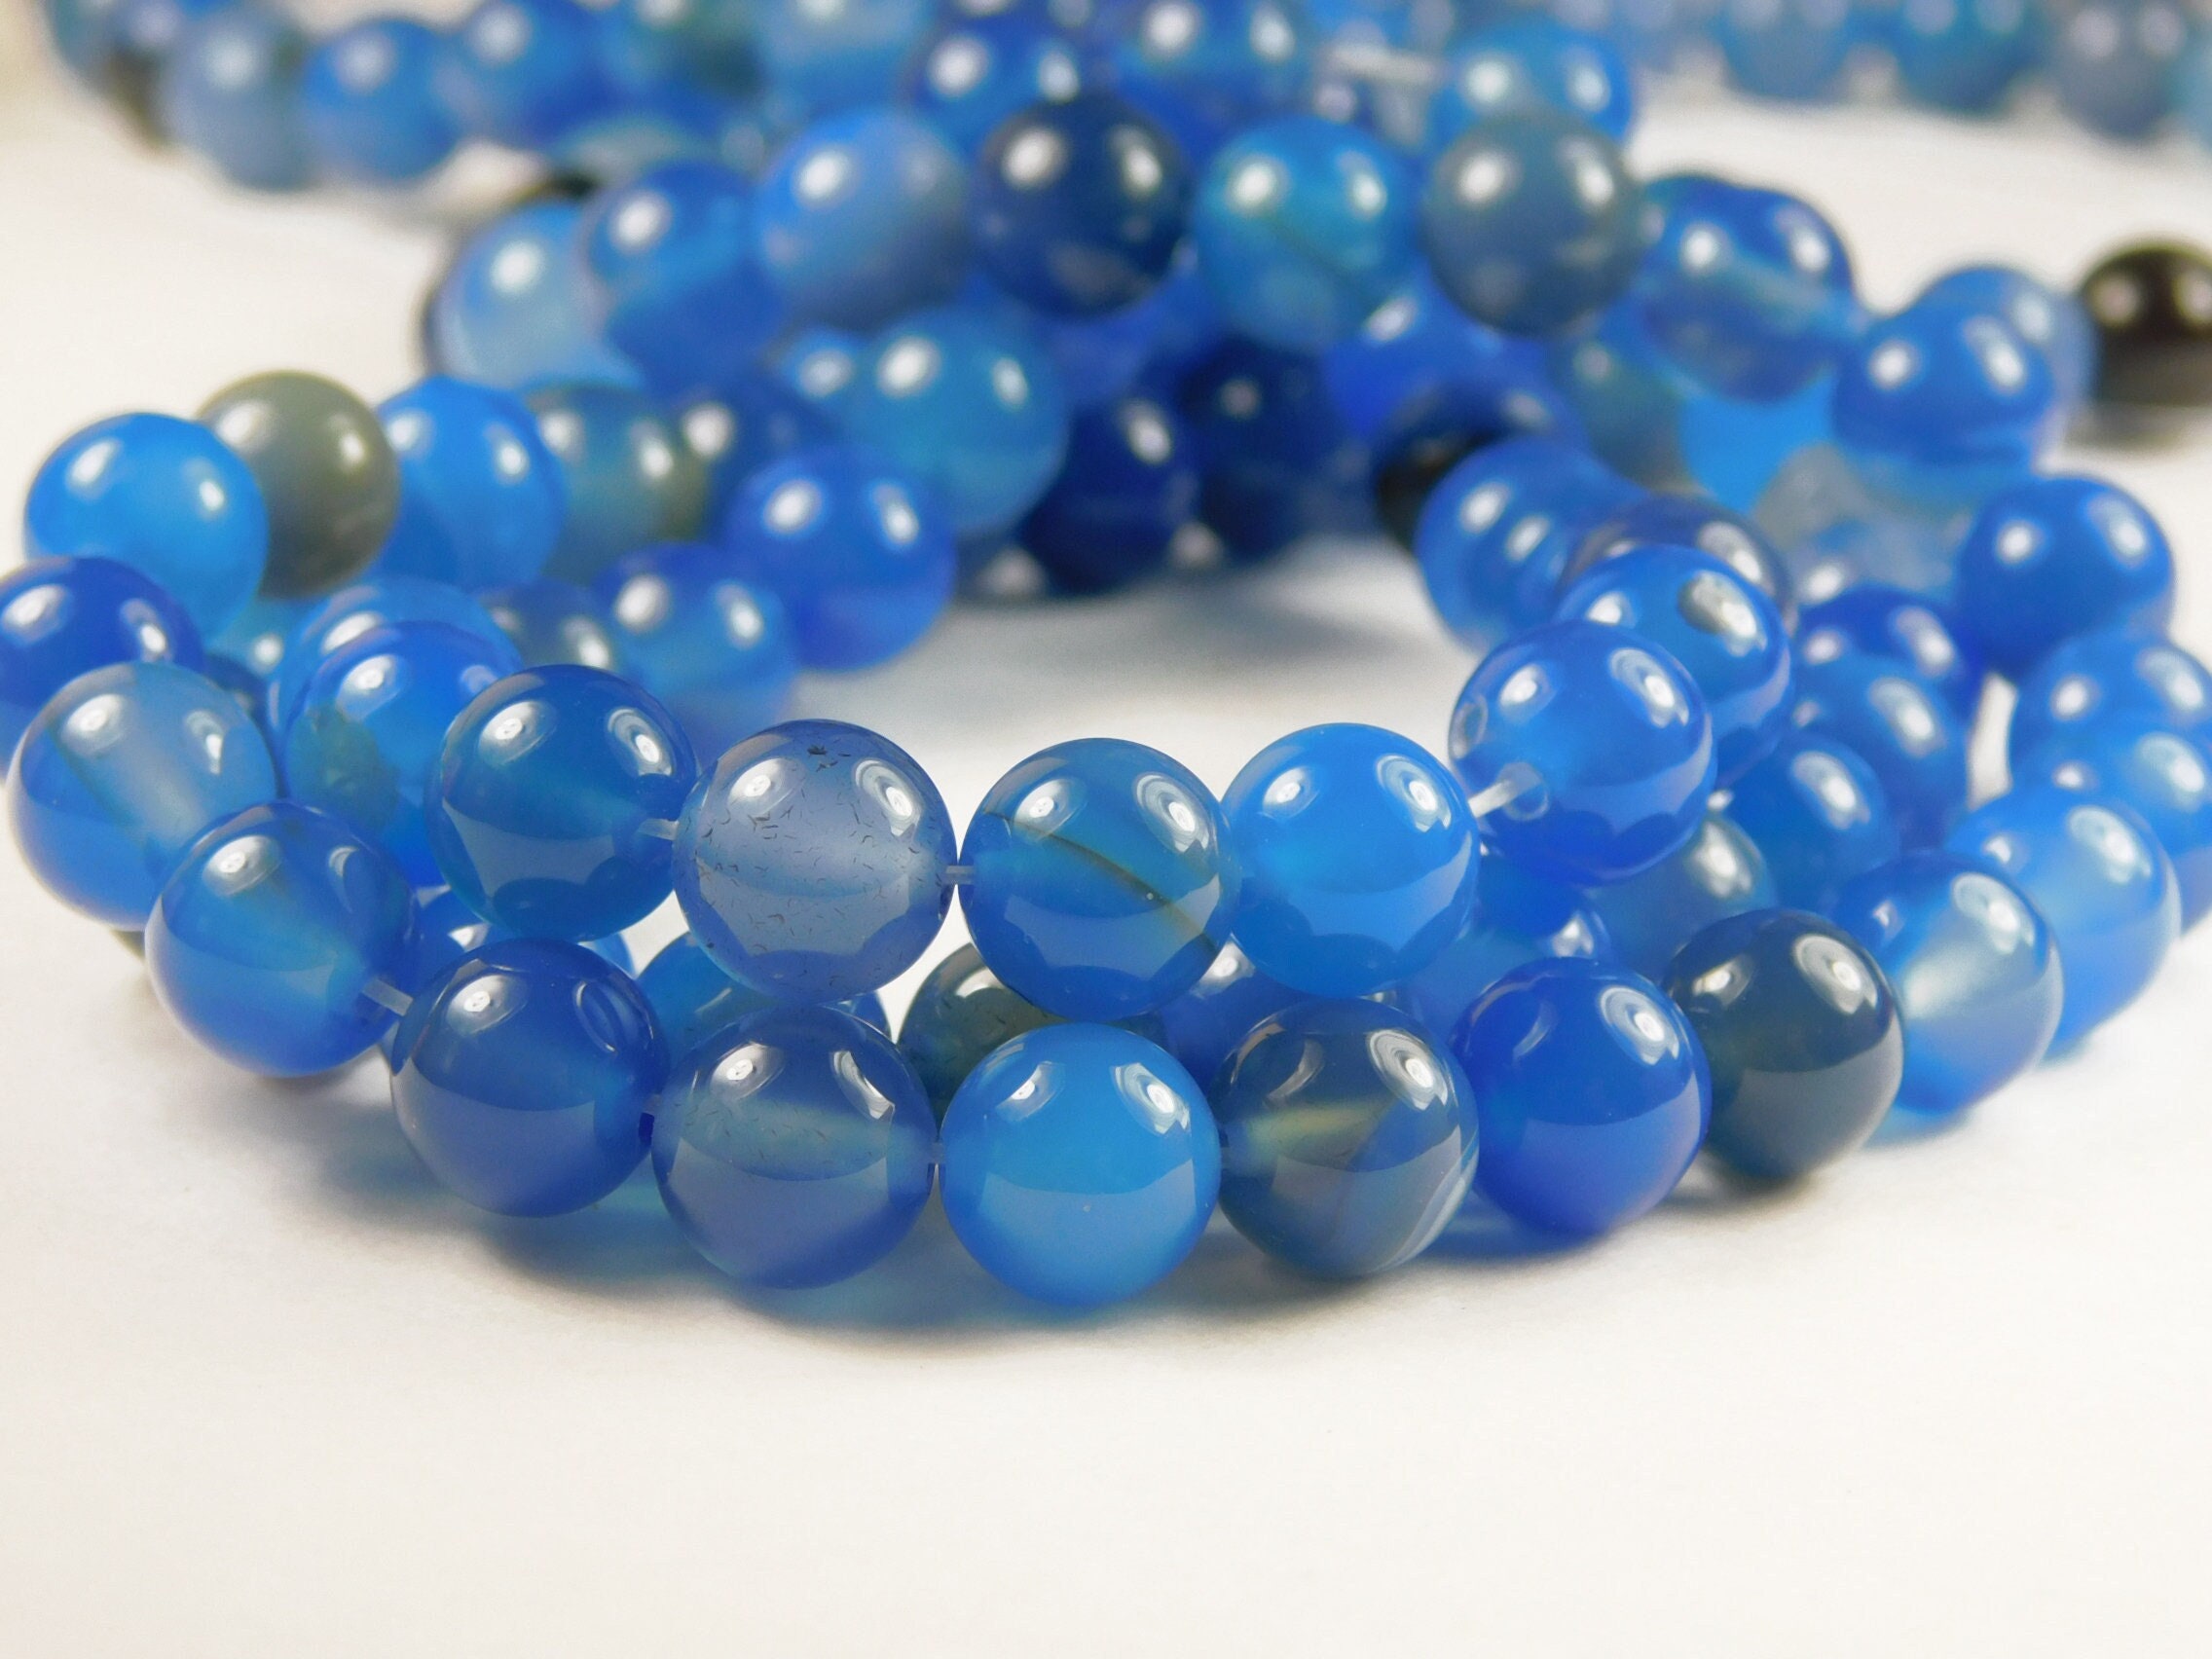 Fossil Beads, Smooth Round Dyed Blue, Orange, Aqua Beads BS 68, Sizes in 4  Mm 6 Mm 8 Mm or 10 Mm 15.75 Inch Strands 